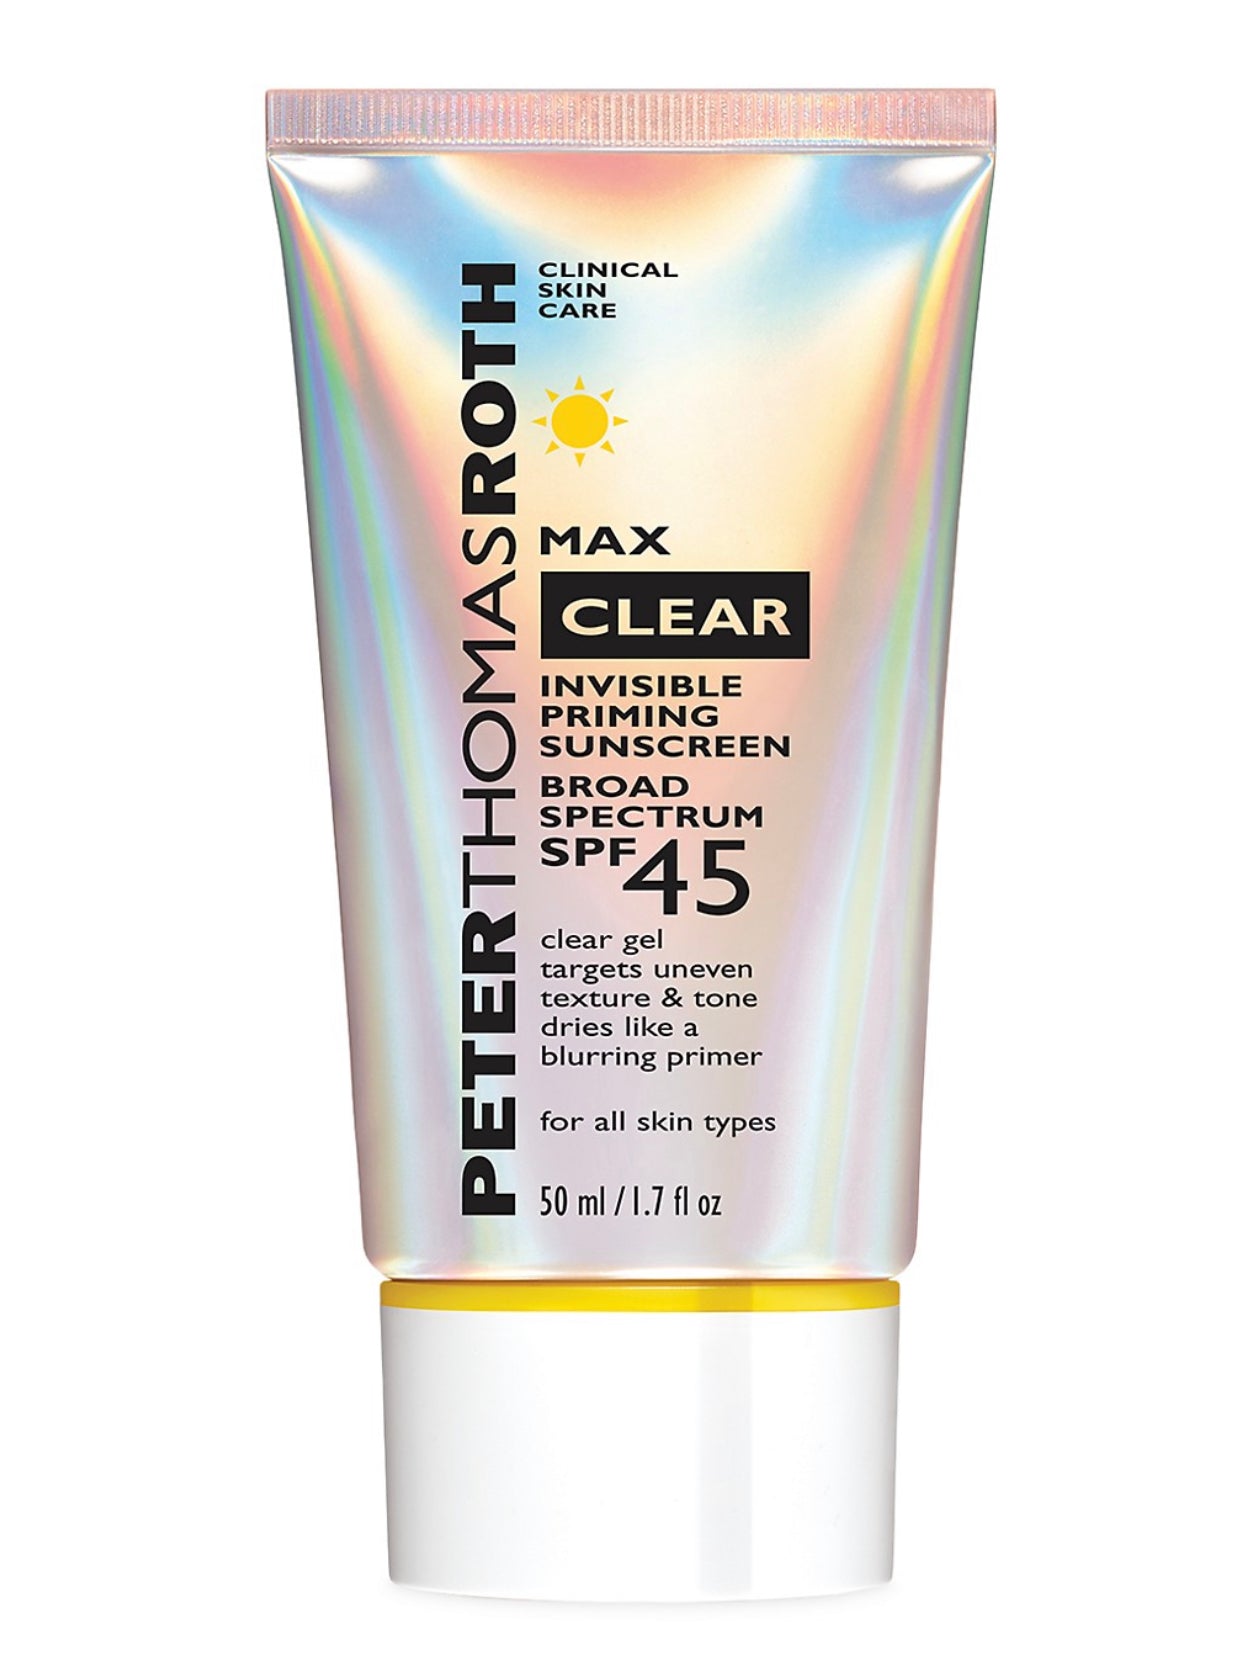 PETER THOMAS ROTH, MAX CLEAR INVISIBLE PRIMING SUNSCREEN BROAD SPECTRUM SPF 45